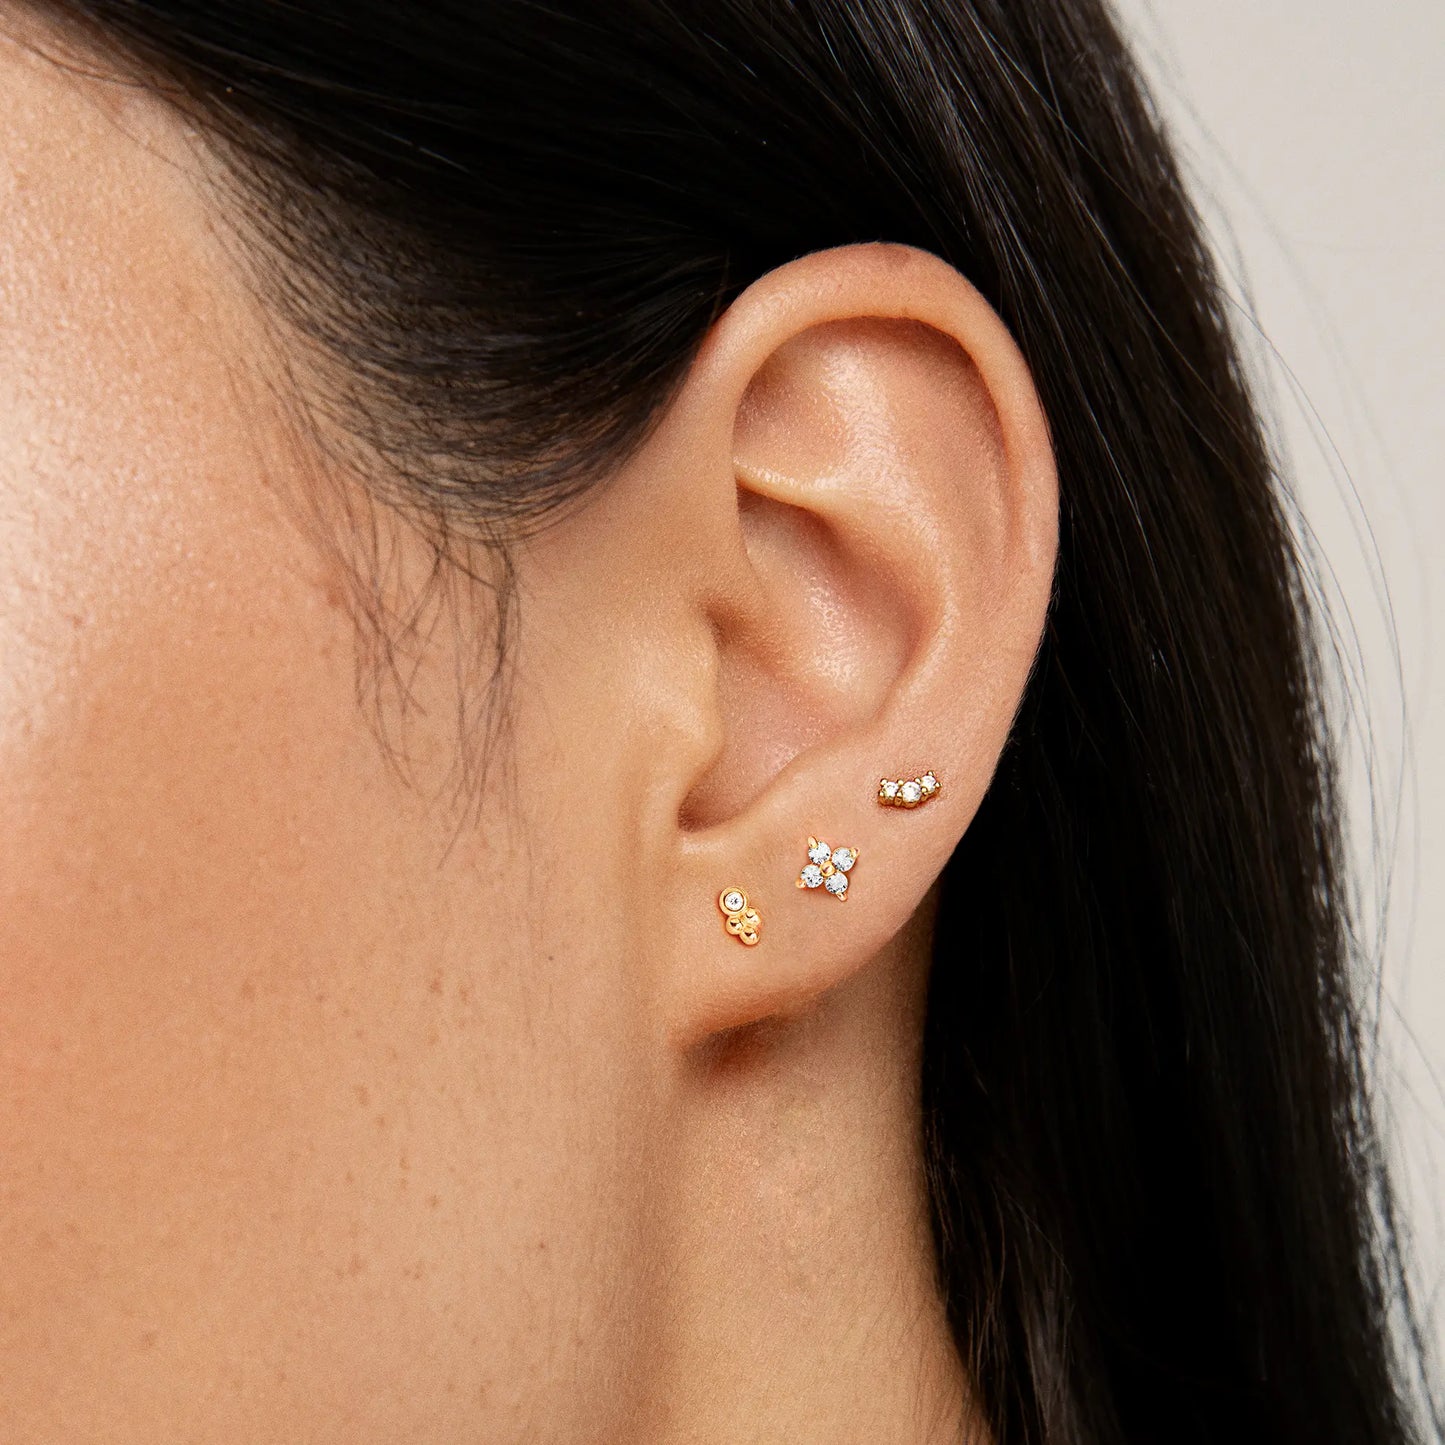 The    Pip Studs by  Francesca Jewellery from the Earrings Collection.